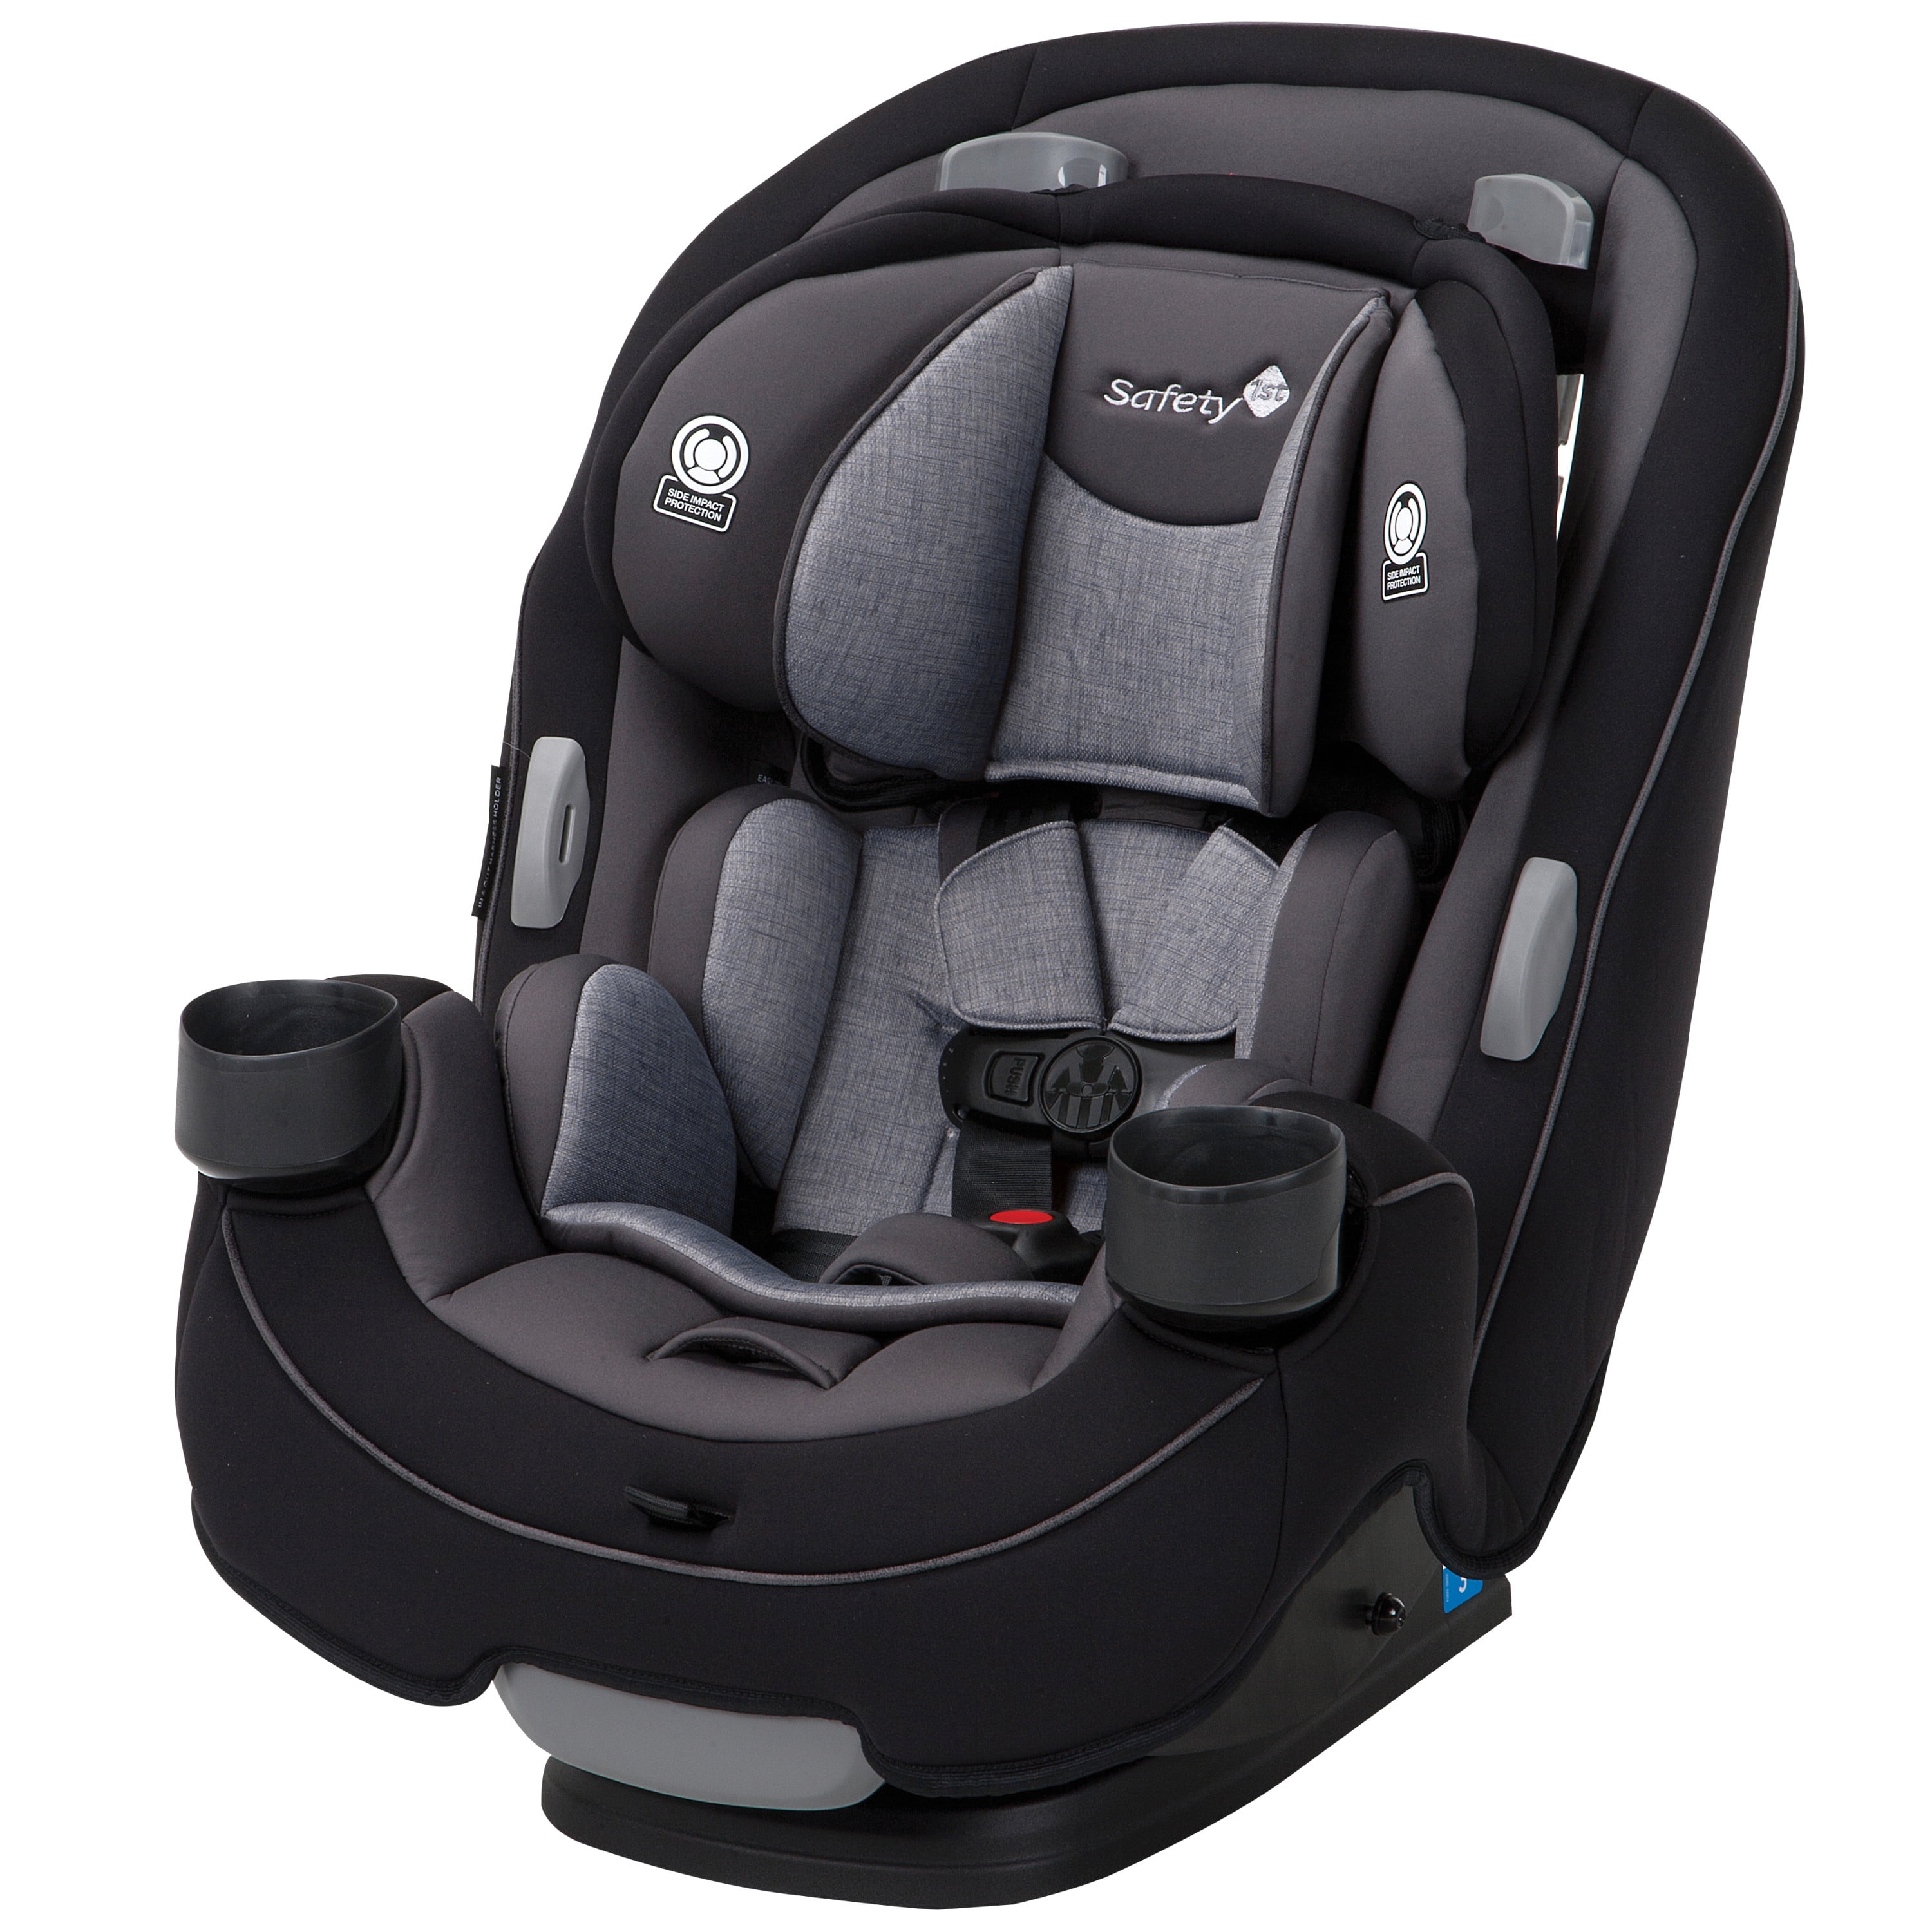 Safety 1st Safety 1ˢᵗ Grow and Go All-in-One Convertible Car Seat, Harvest Moon